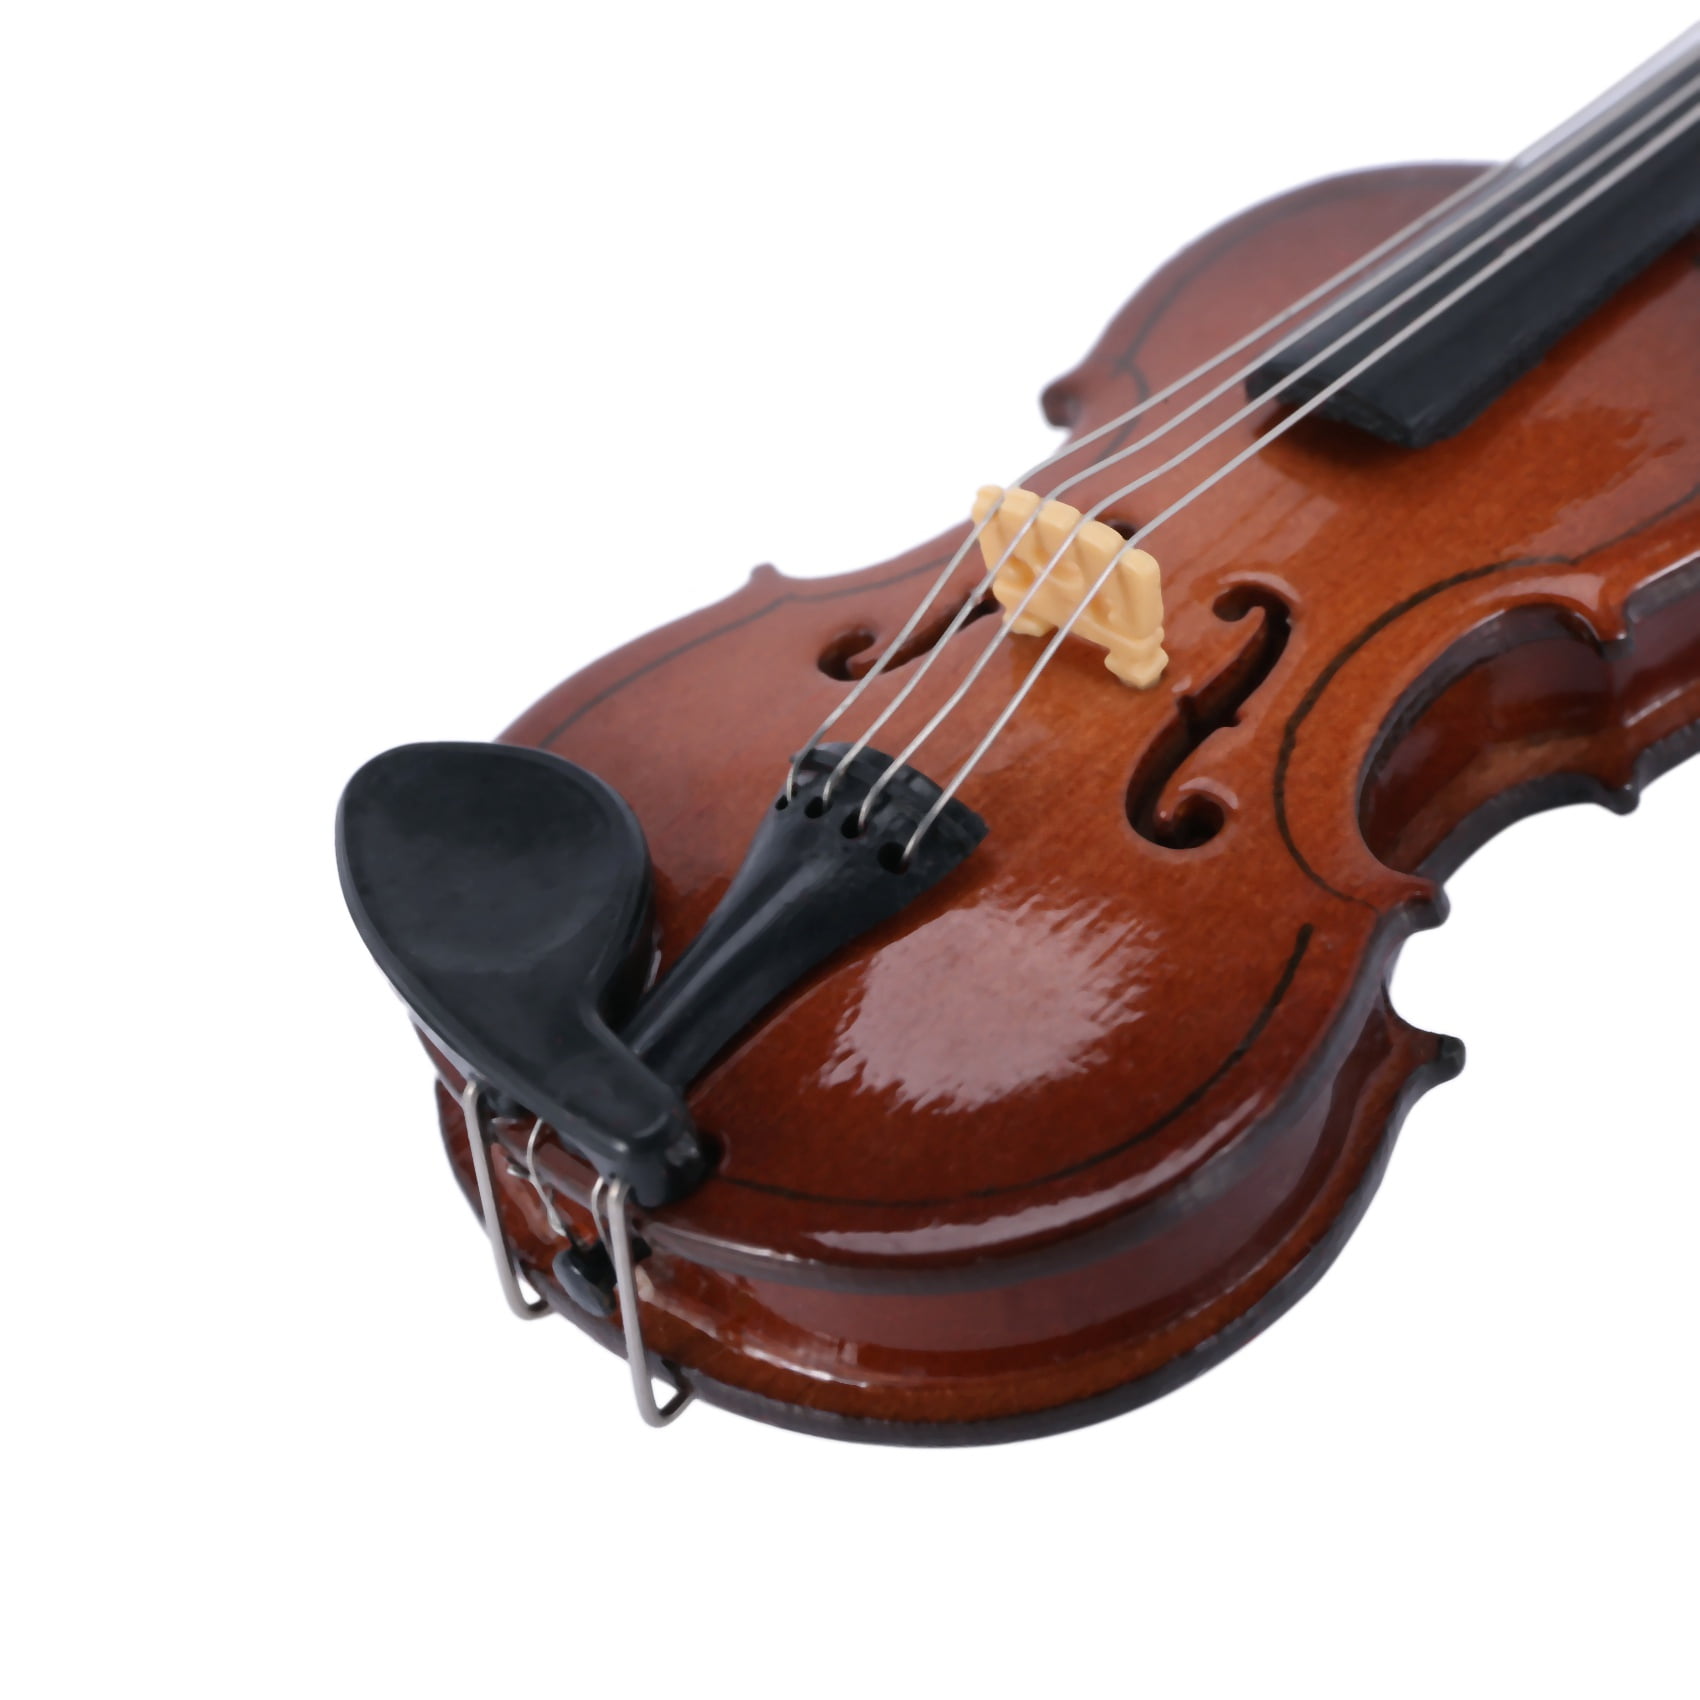 Details about   Gifts Violin Music Instrument Miniature Replica with Case N5M6 